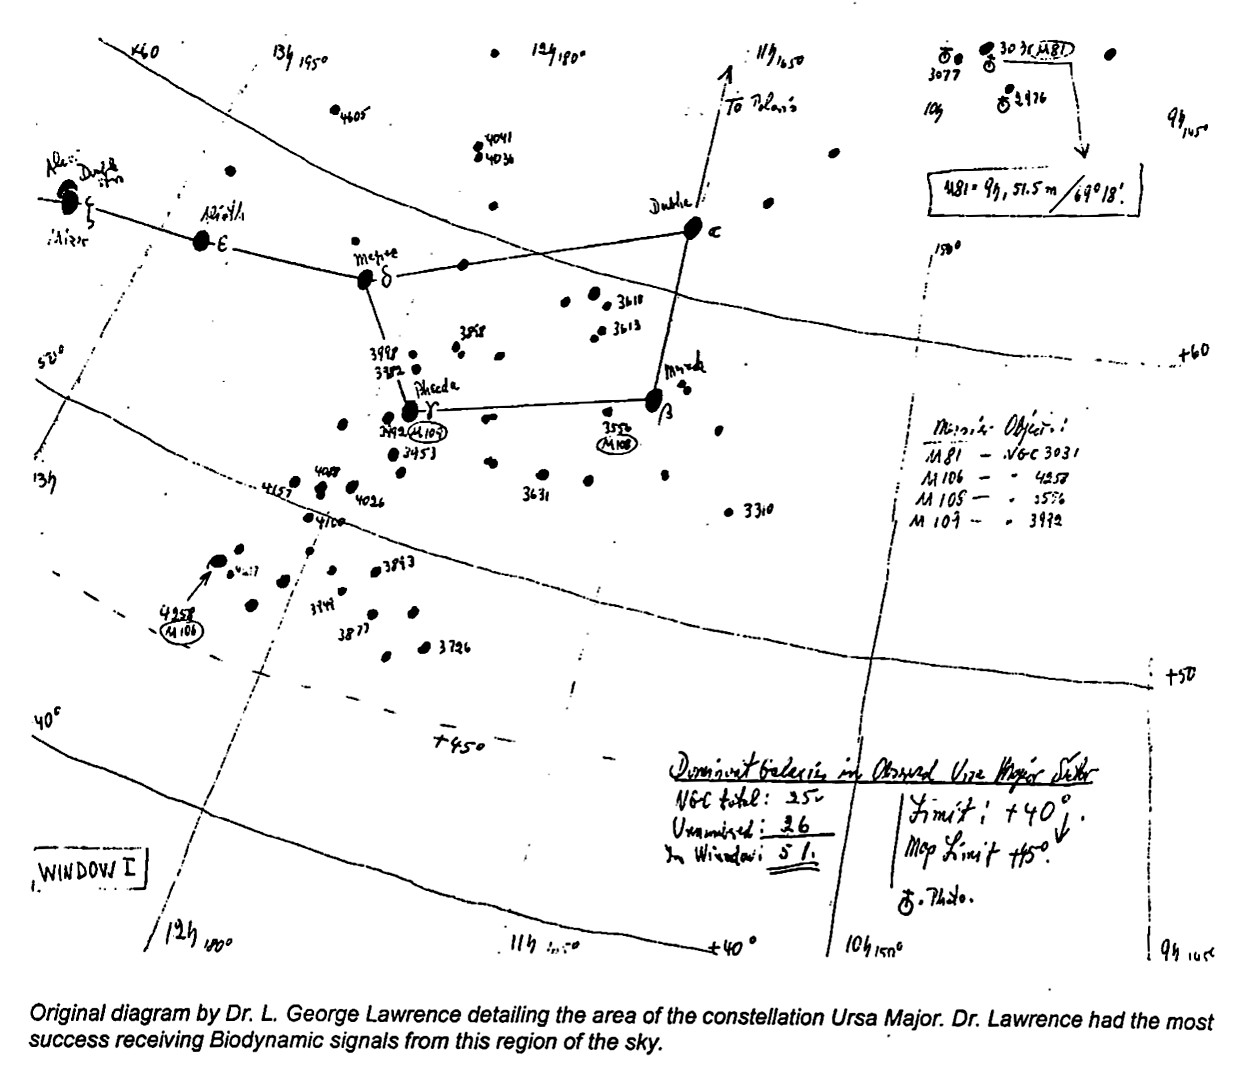 Original diagram by Dr. L. George Lawrence detailing the area of the constellation Ursa Major. Dr. Lawrence had the most success receiving Biodynamic signals from this region of the sky.